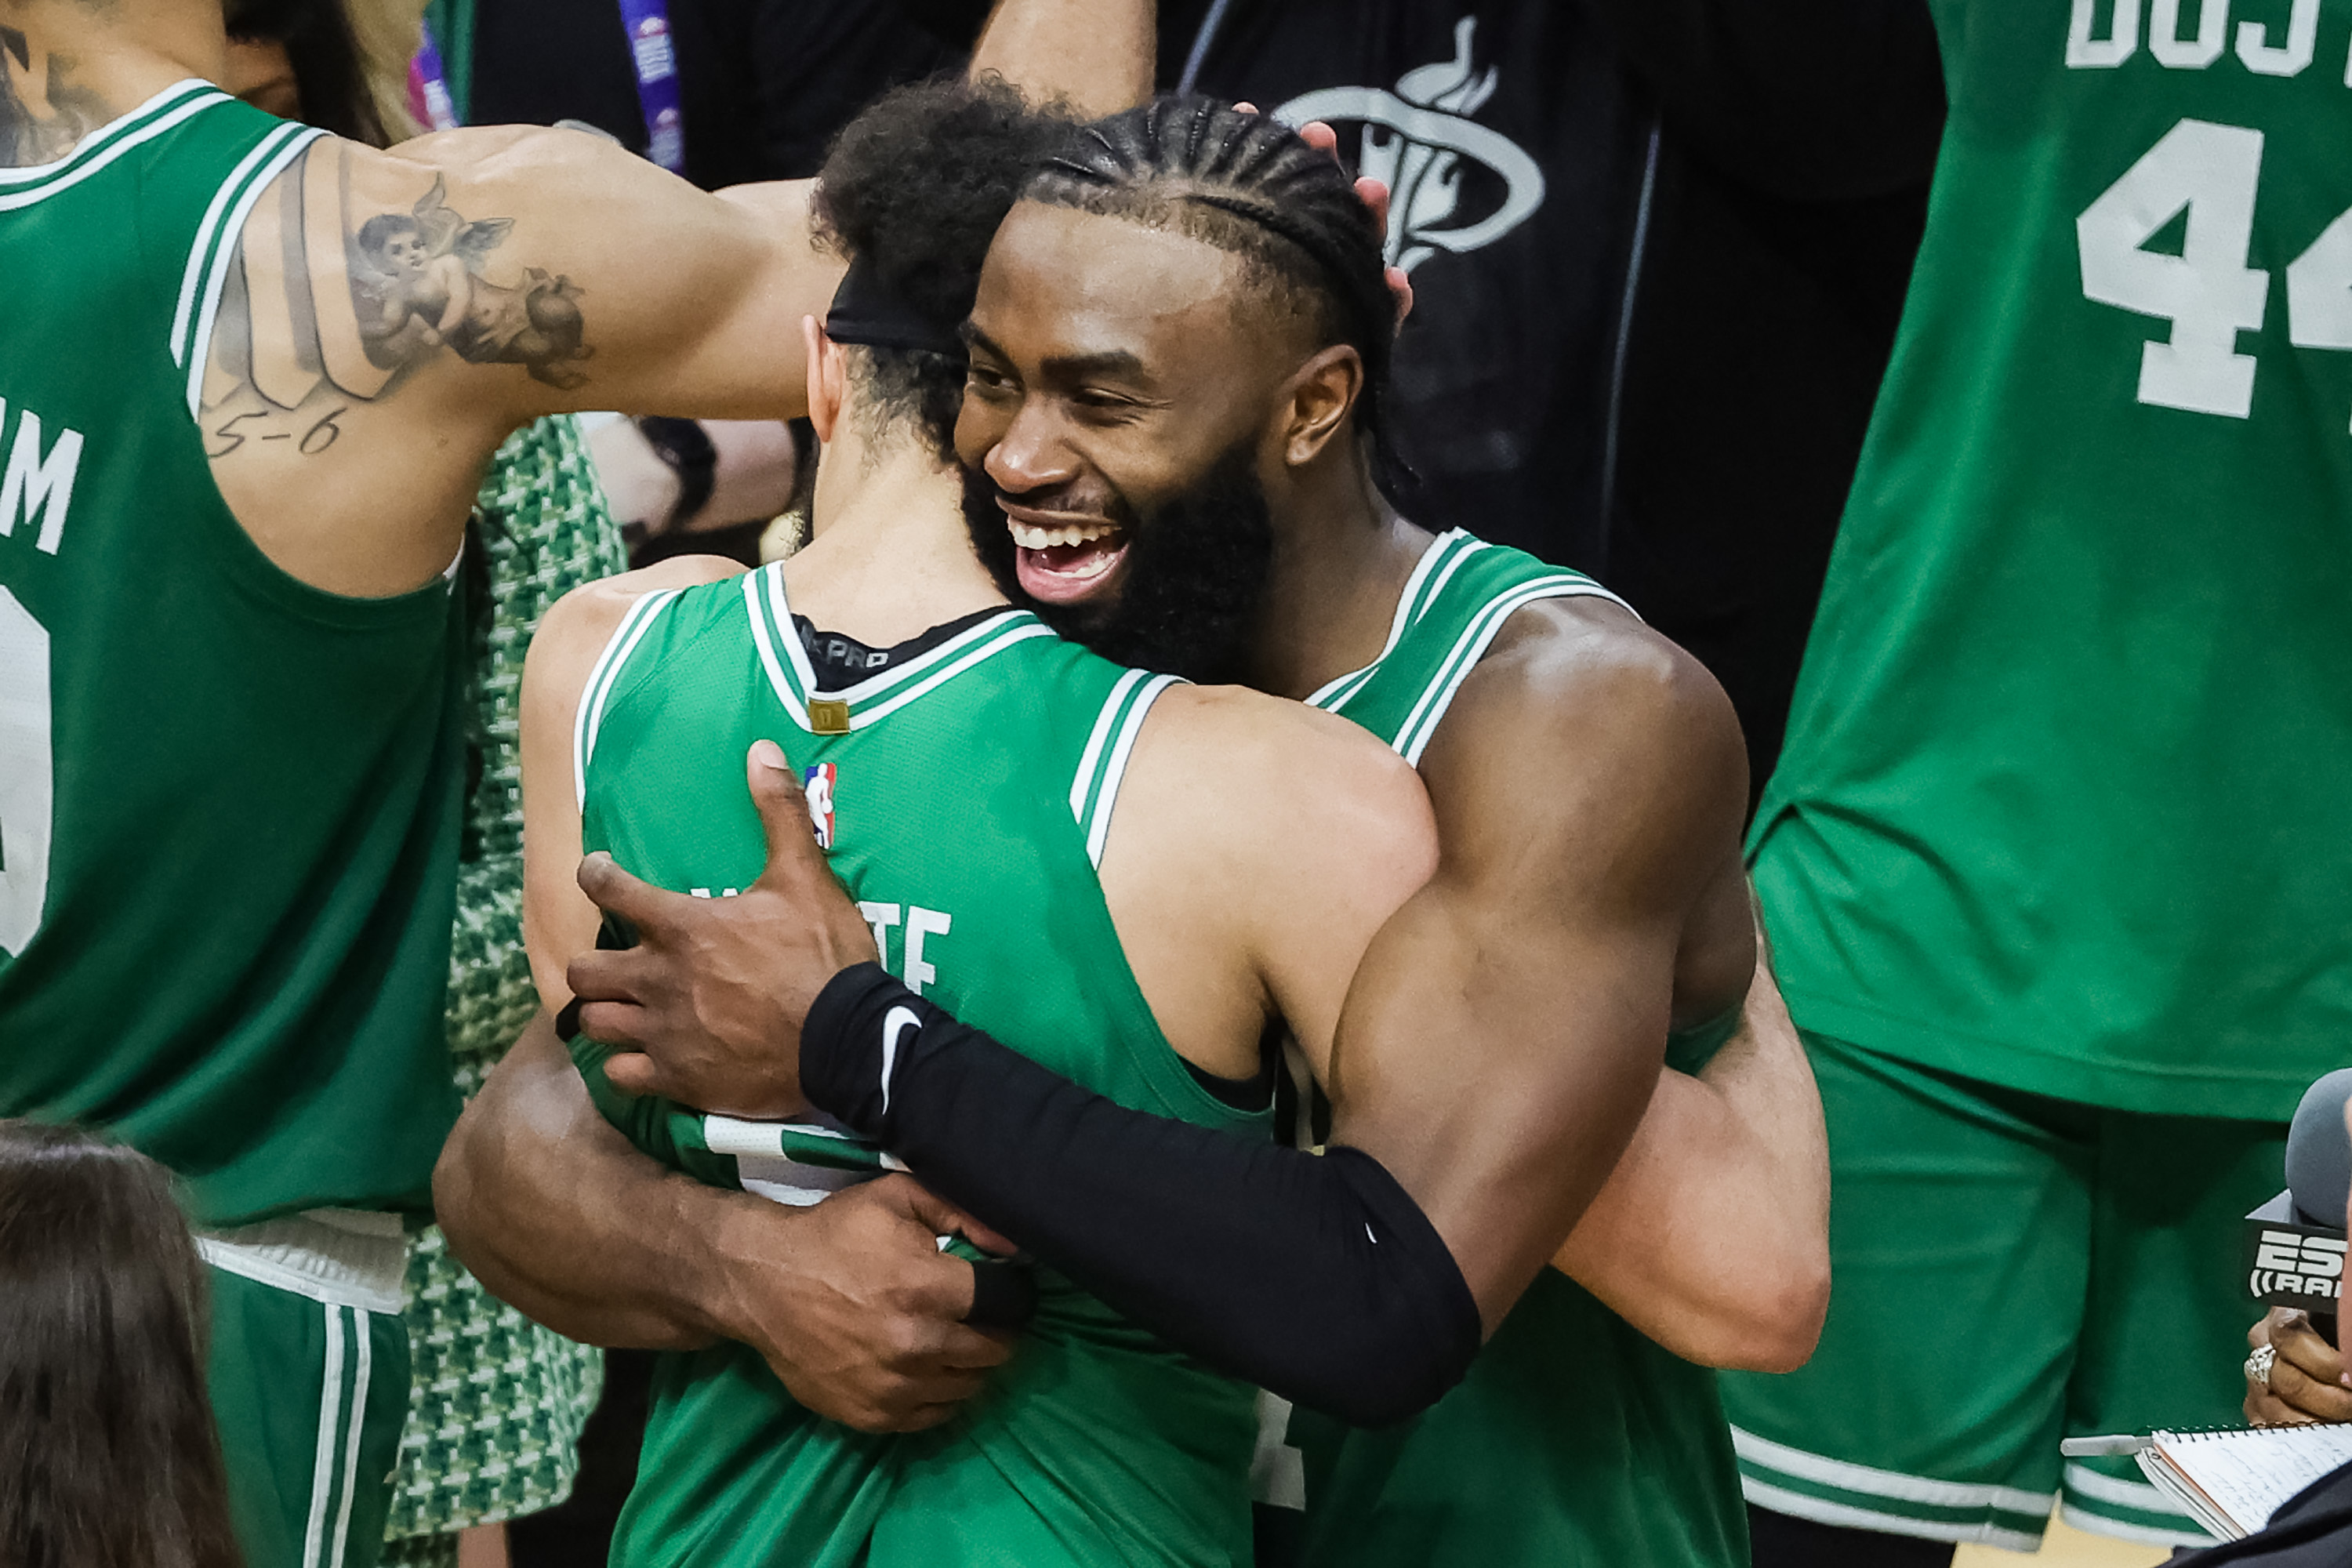 Celtics shake up their starting lineup for elimination game against 76ers